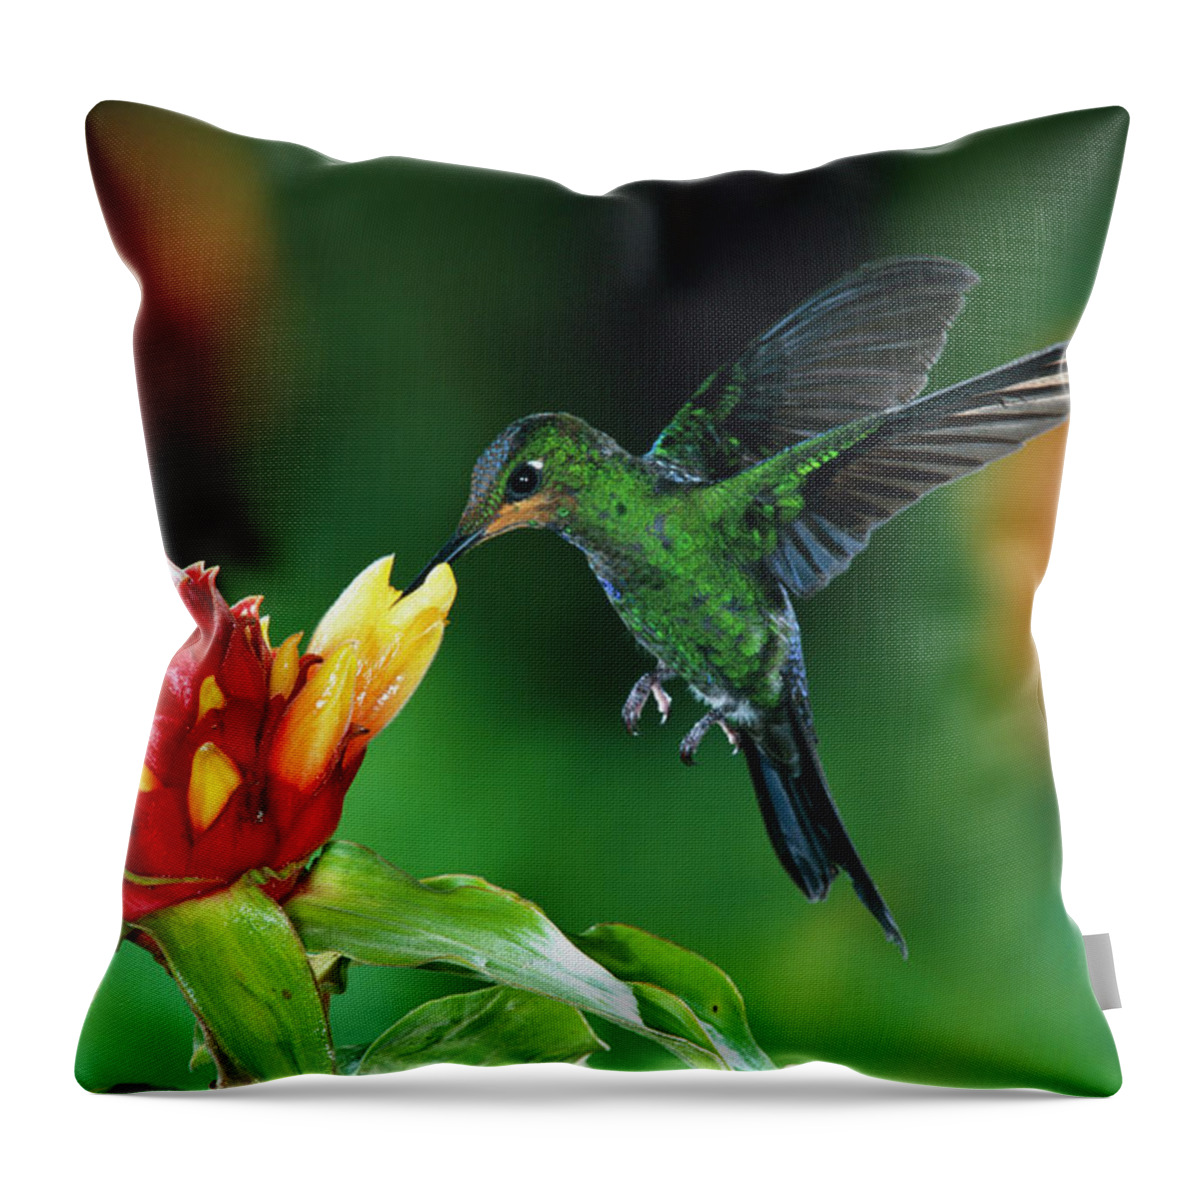 00511213 Throw Pillow featuring the photograph Green Crowned Brilliant Hummingbird by Michael and Patricia Fogden